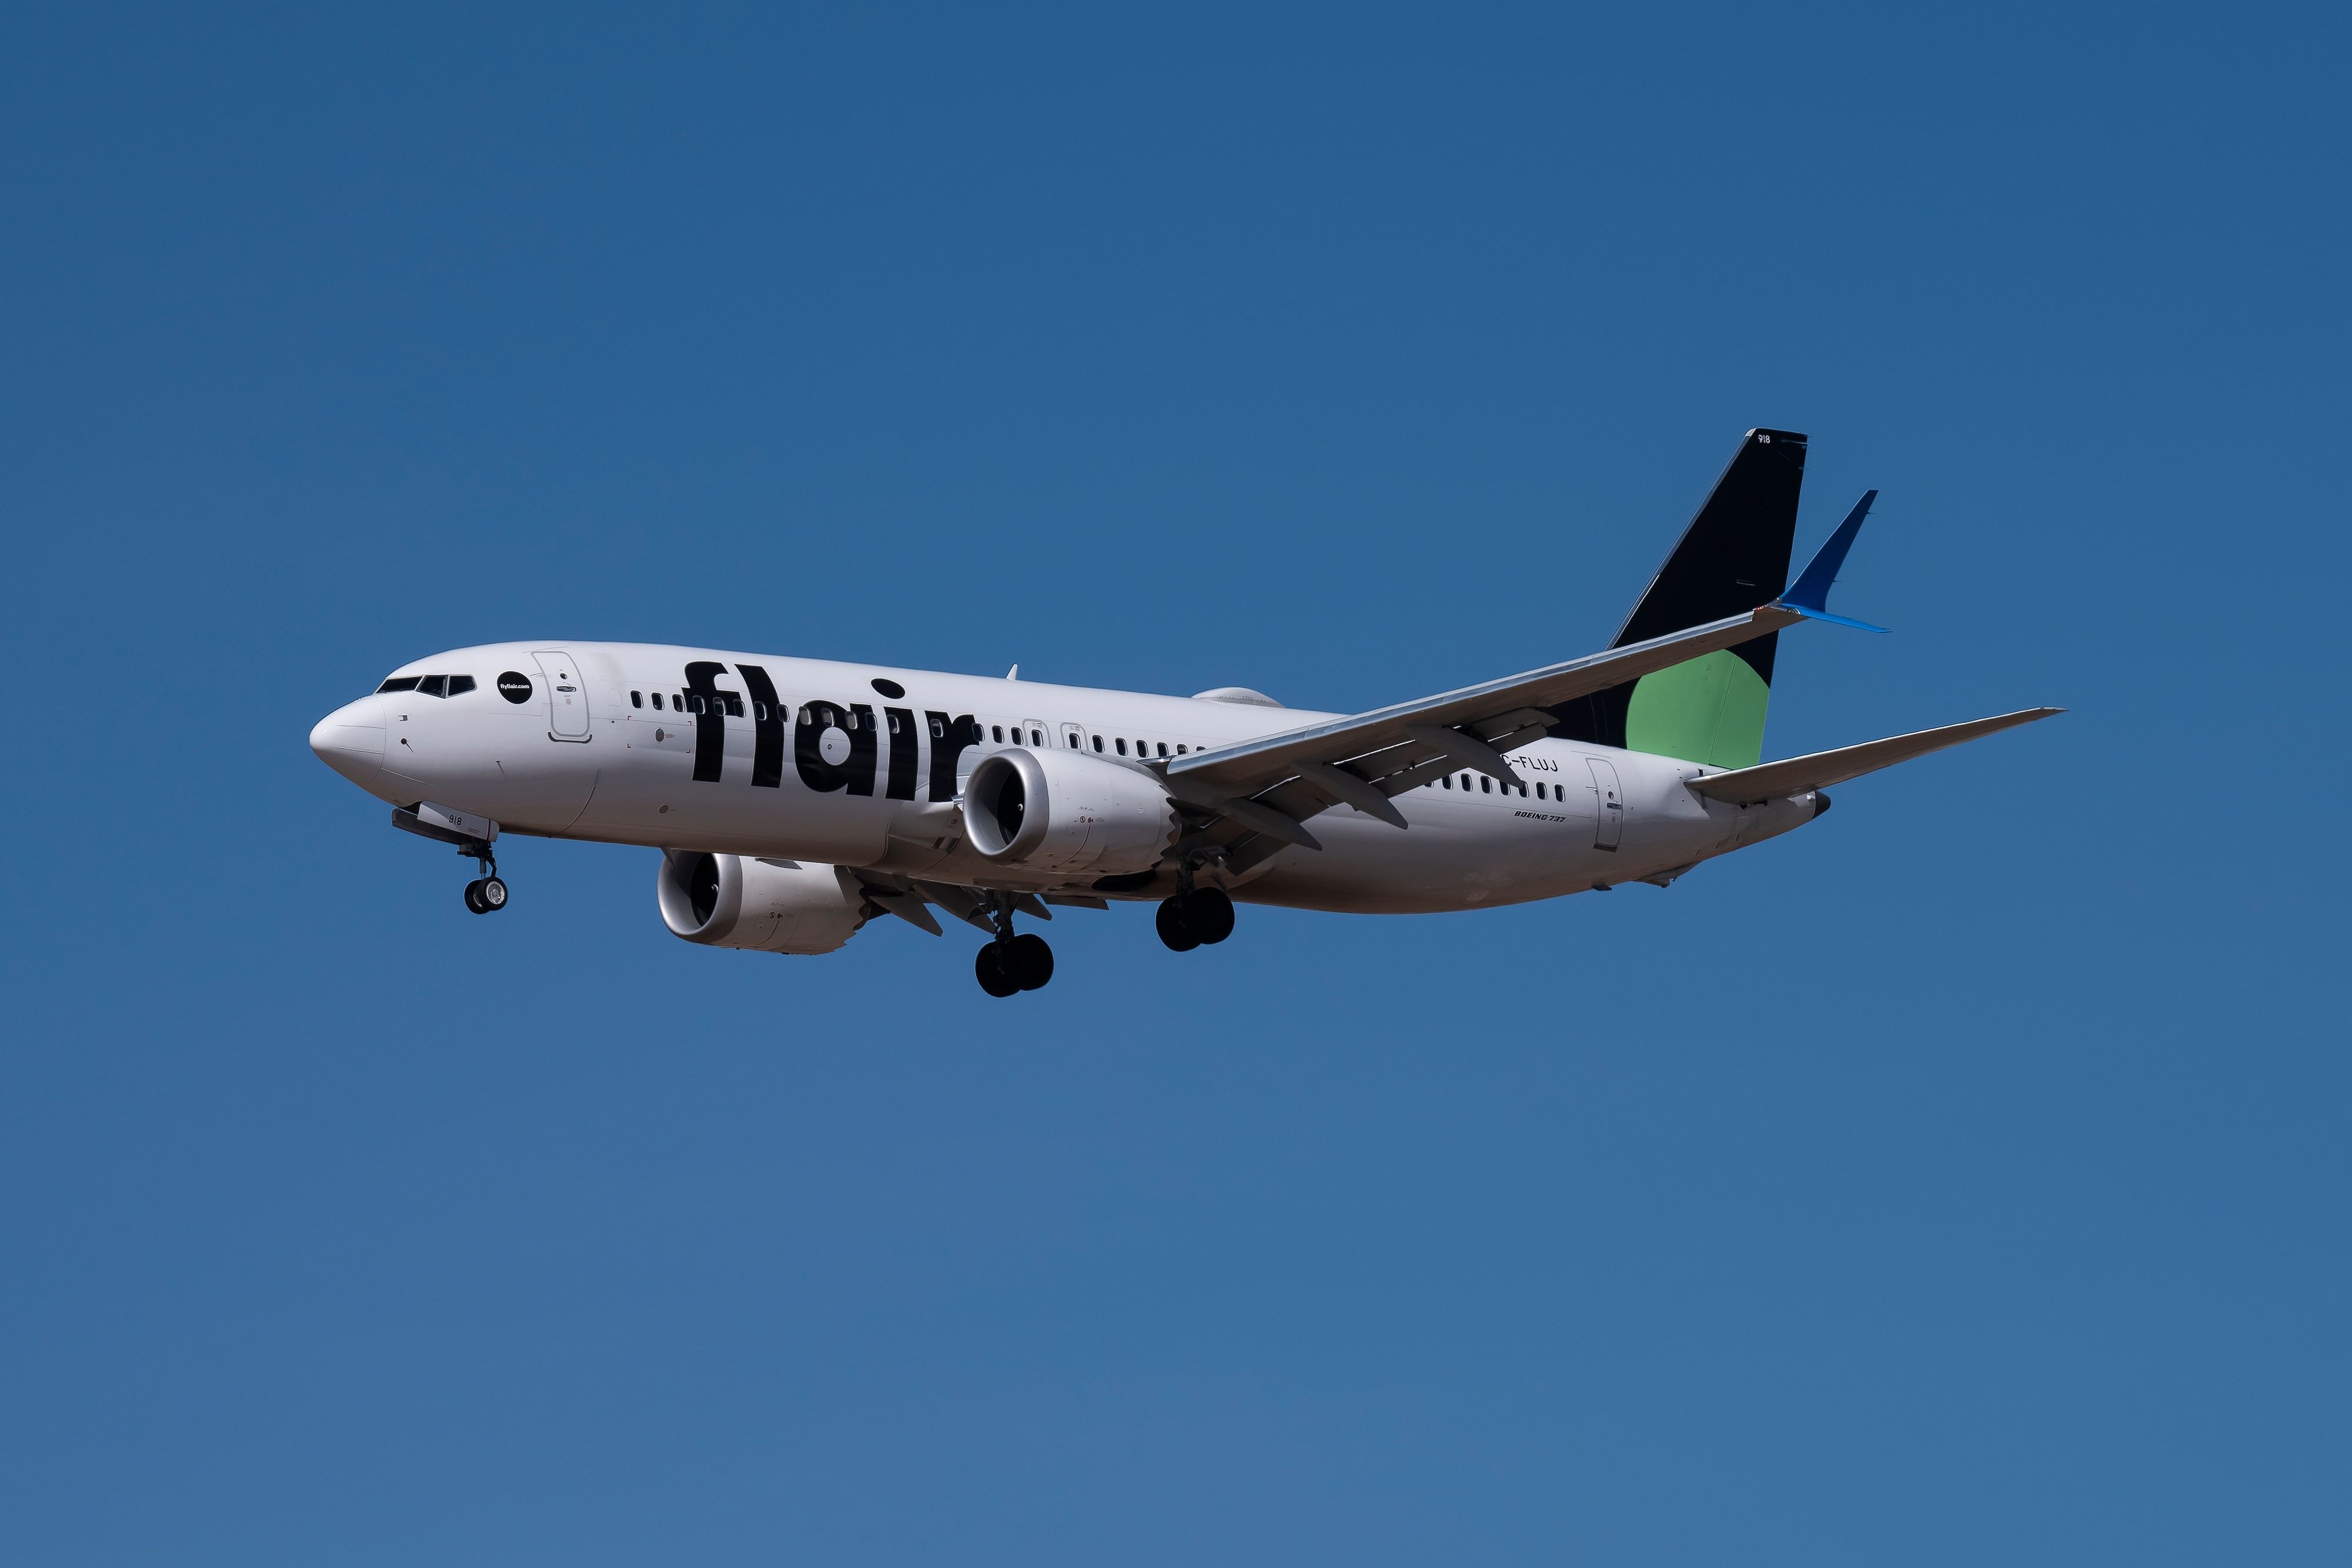 A Flair Airlines Boeing 737 MAX 8